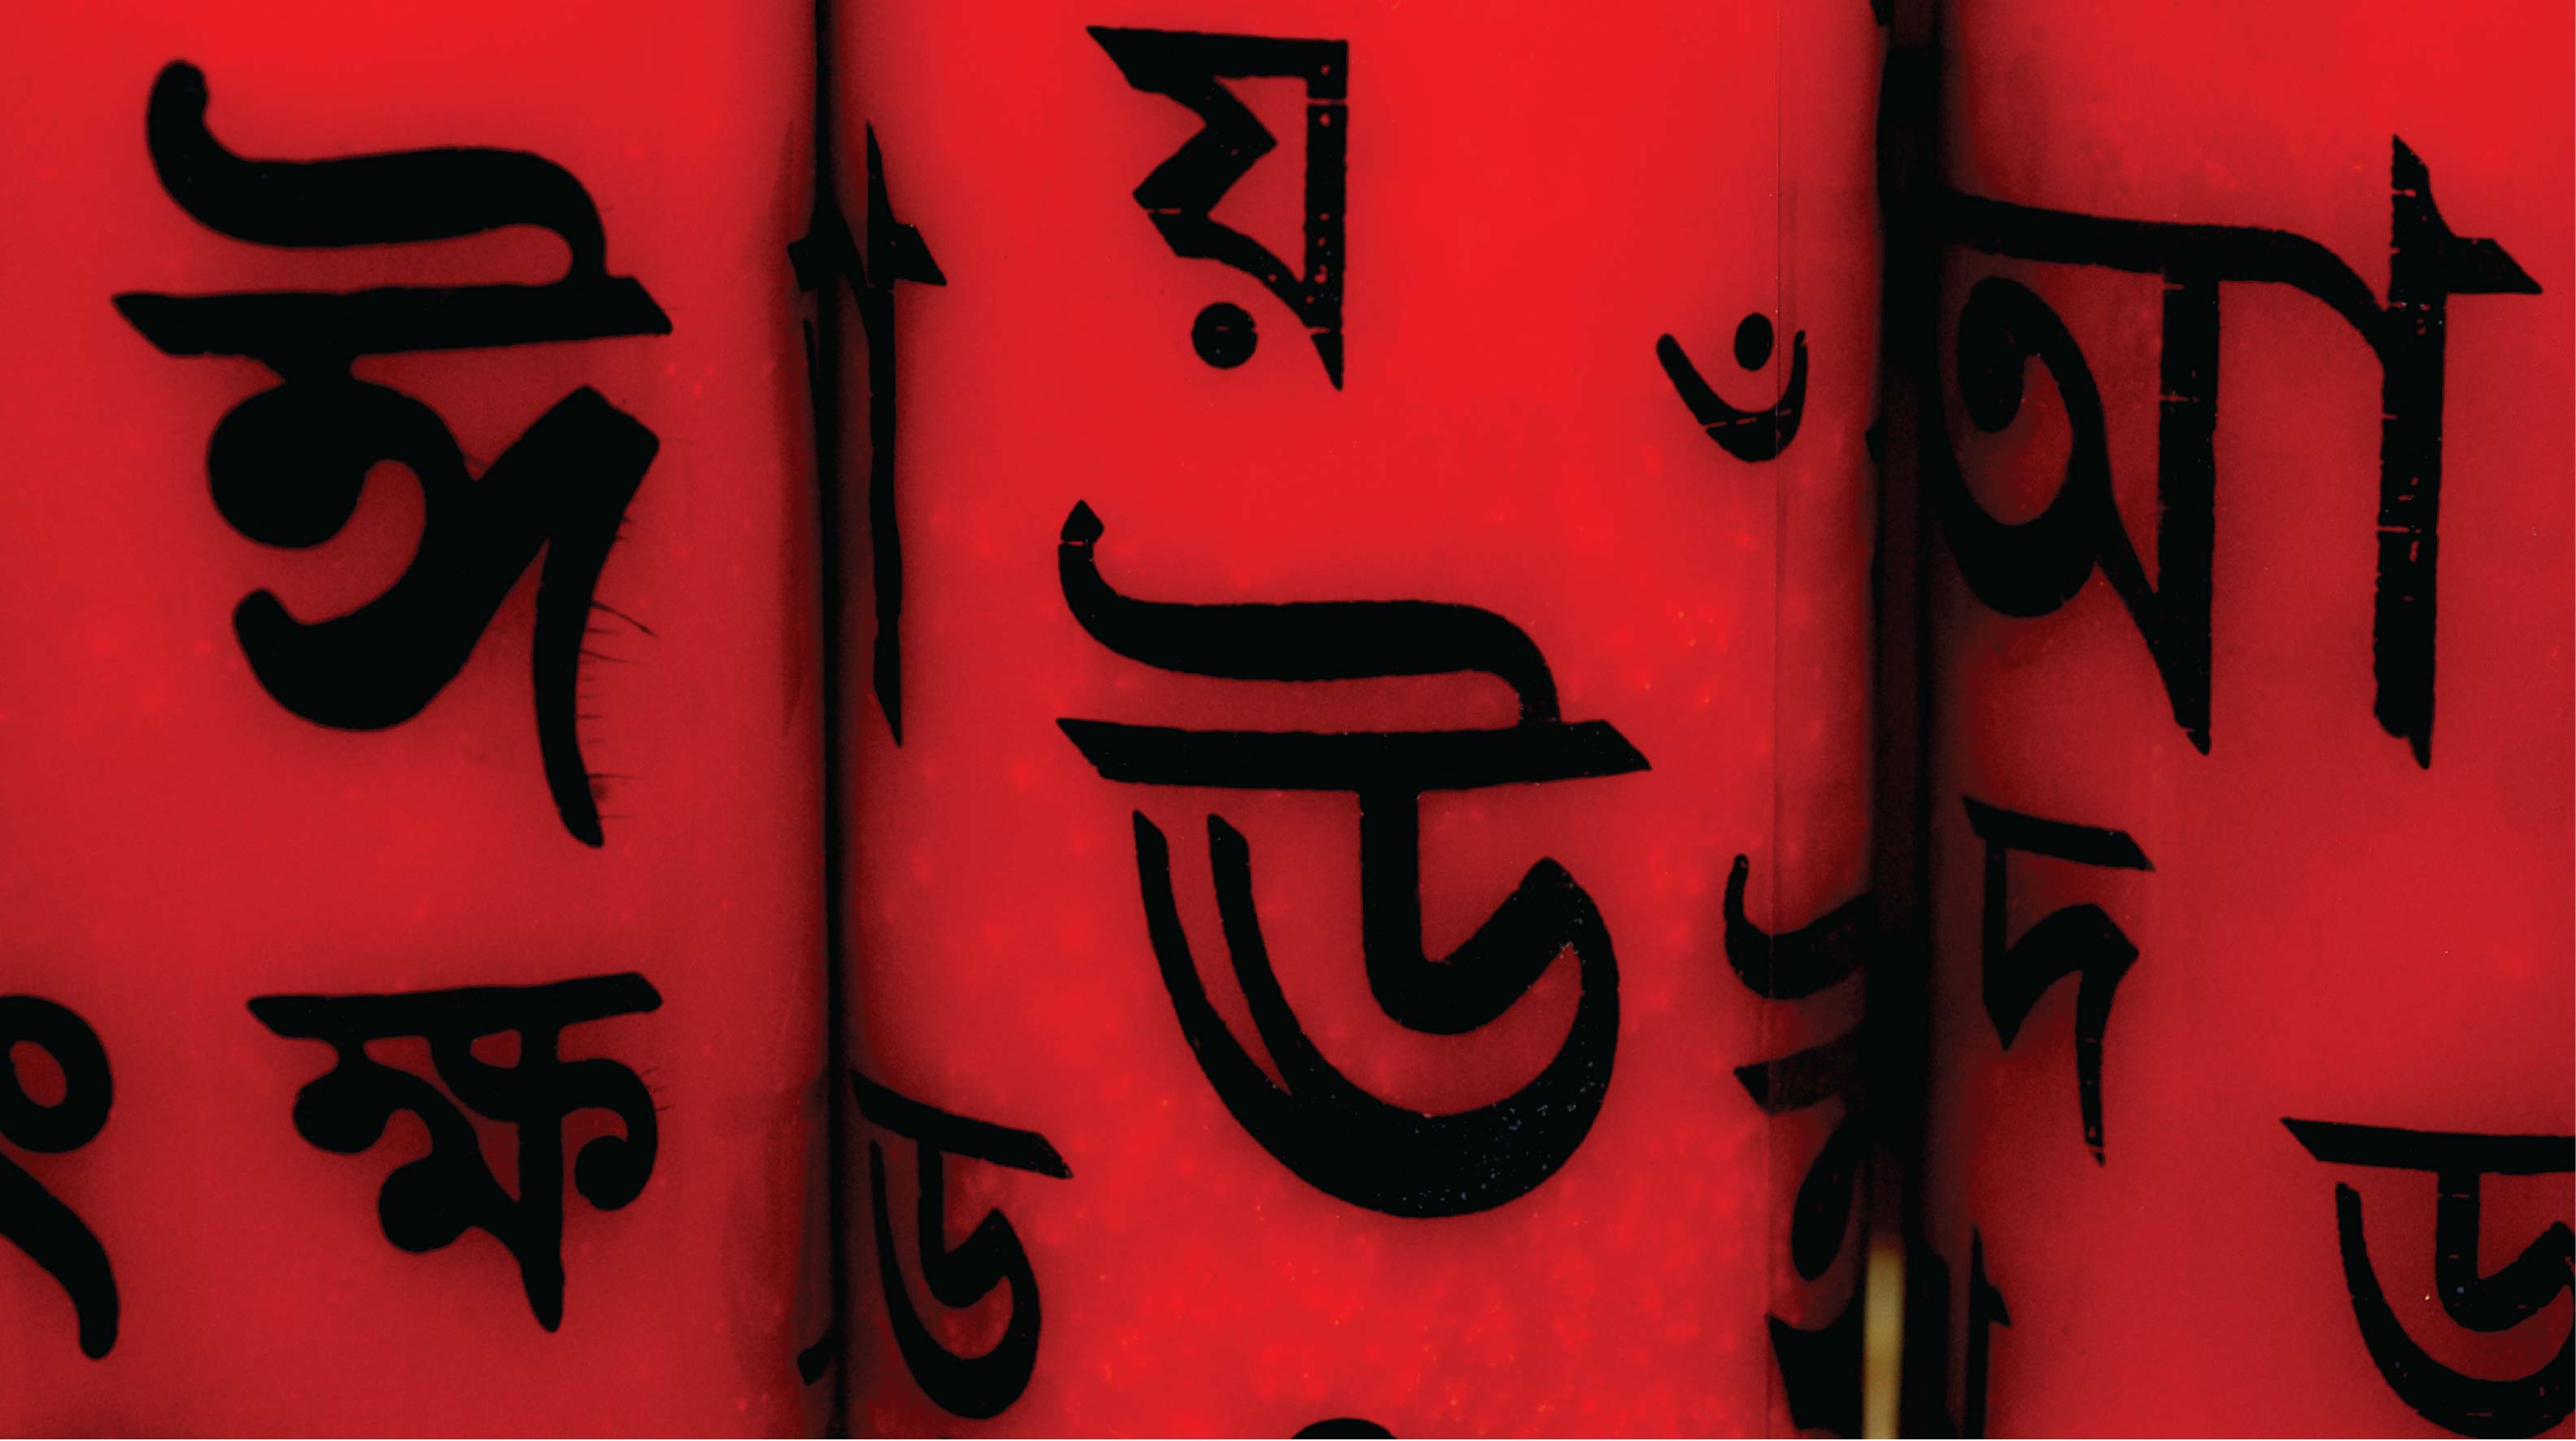 subliminal meaning in bengali